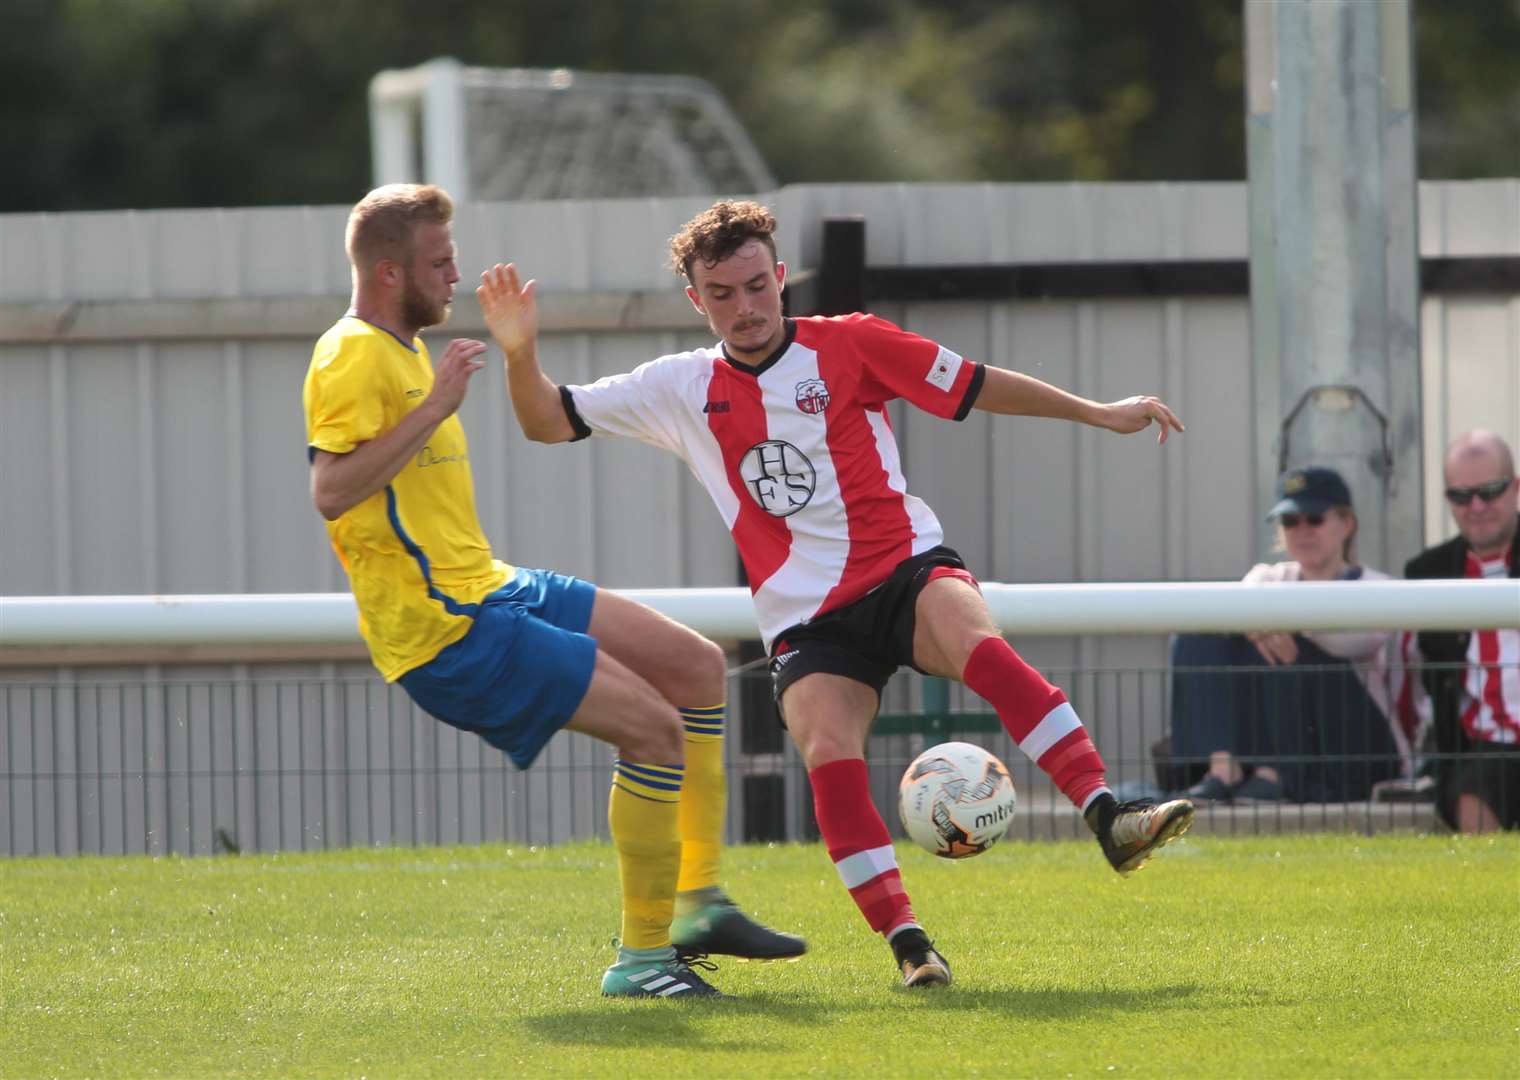 Sheppey (red and white) beat Seaford 5-3 in the second qualifying round Picture: John Westhrop